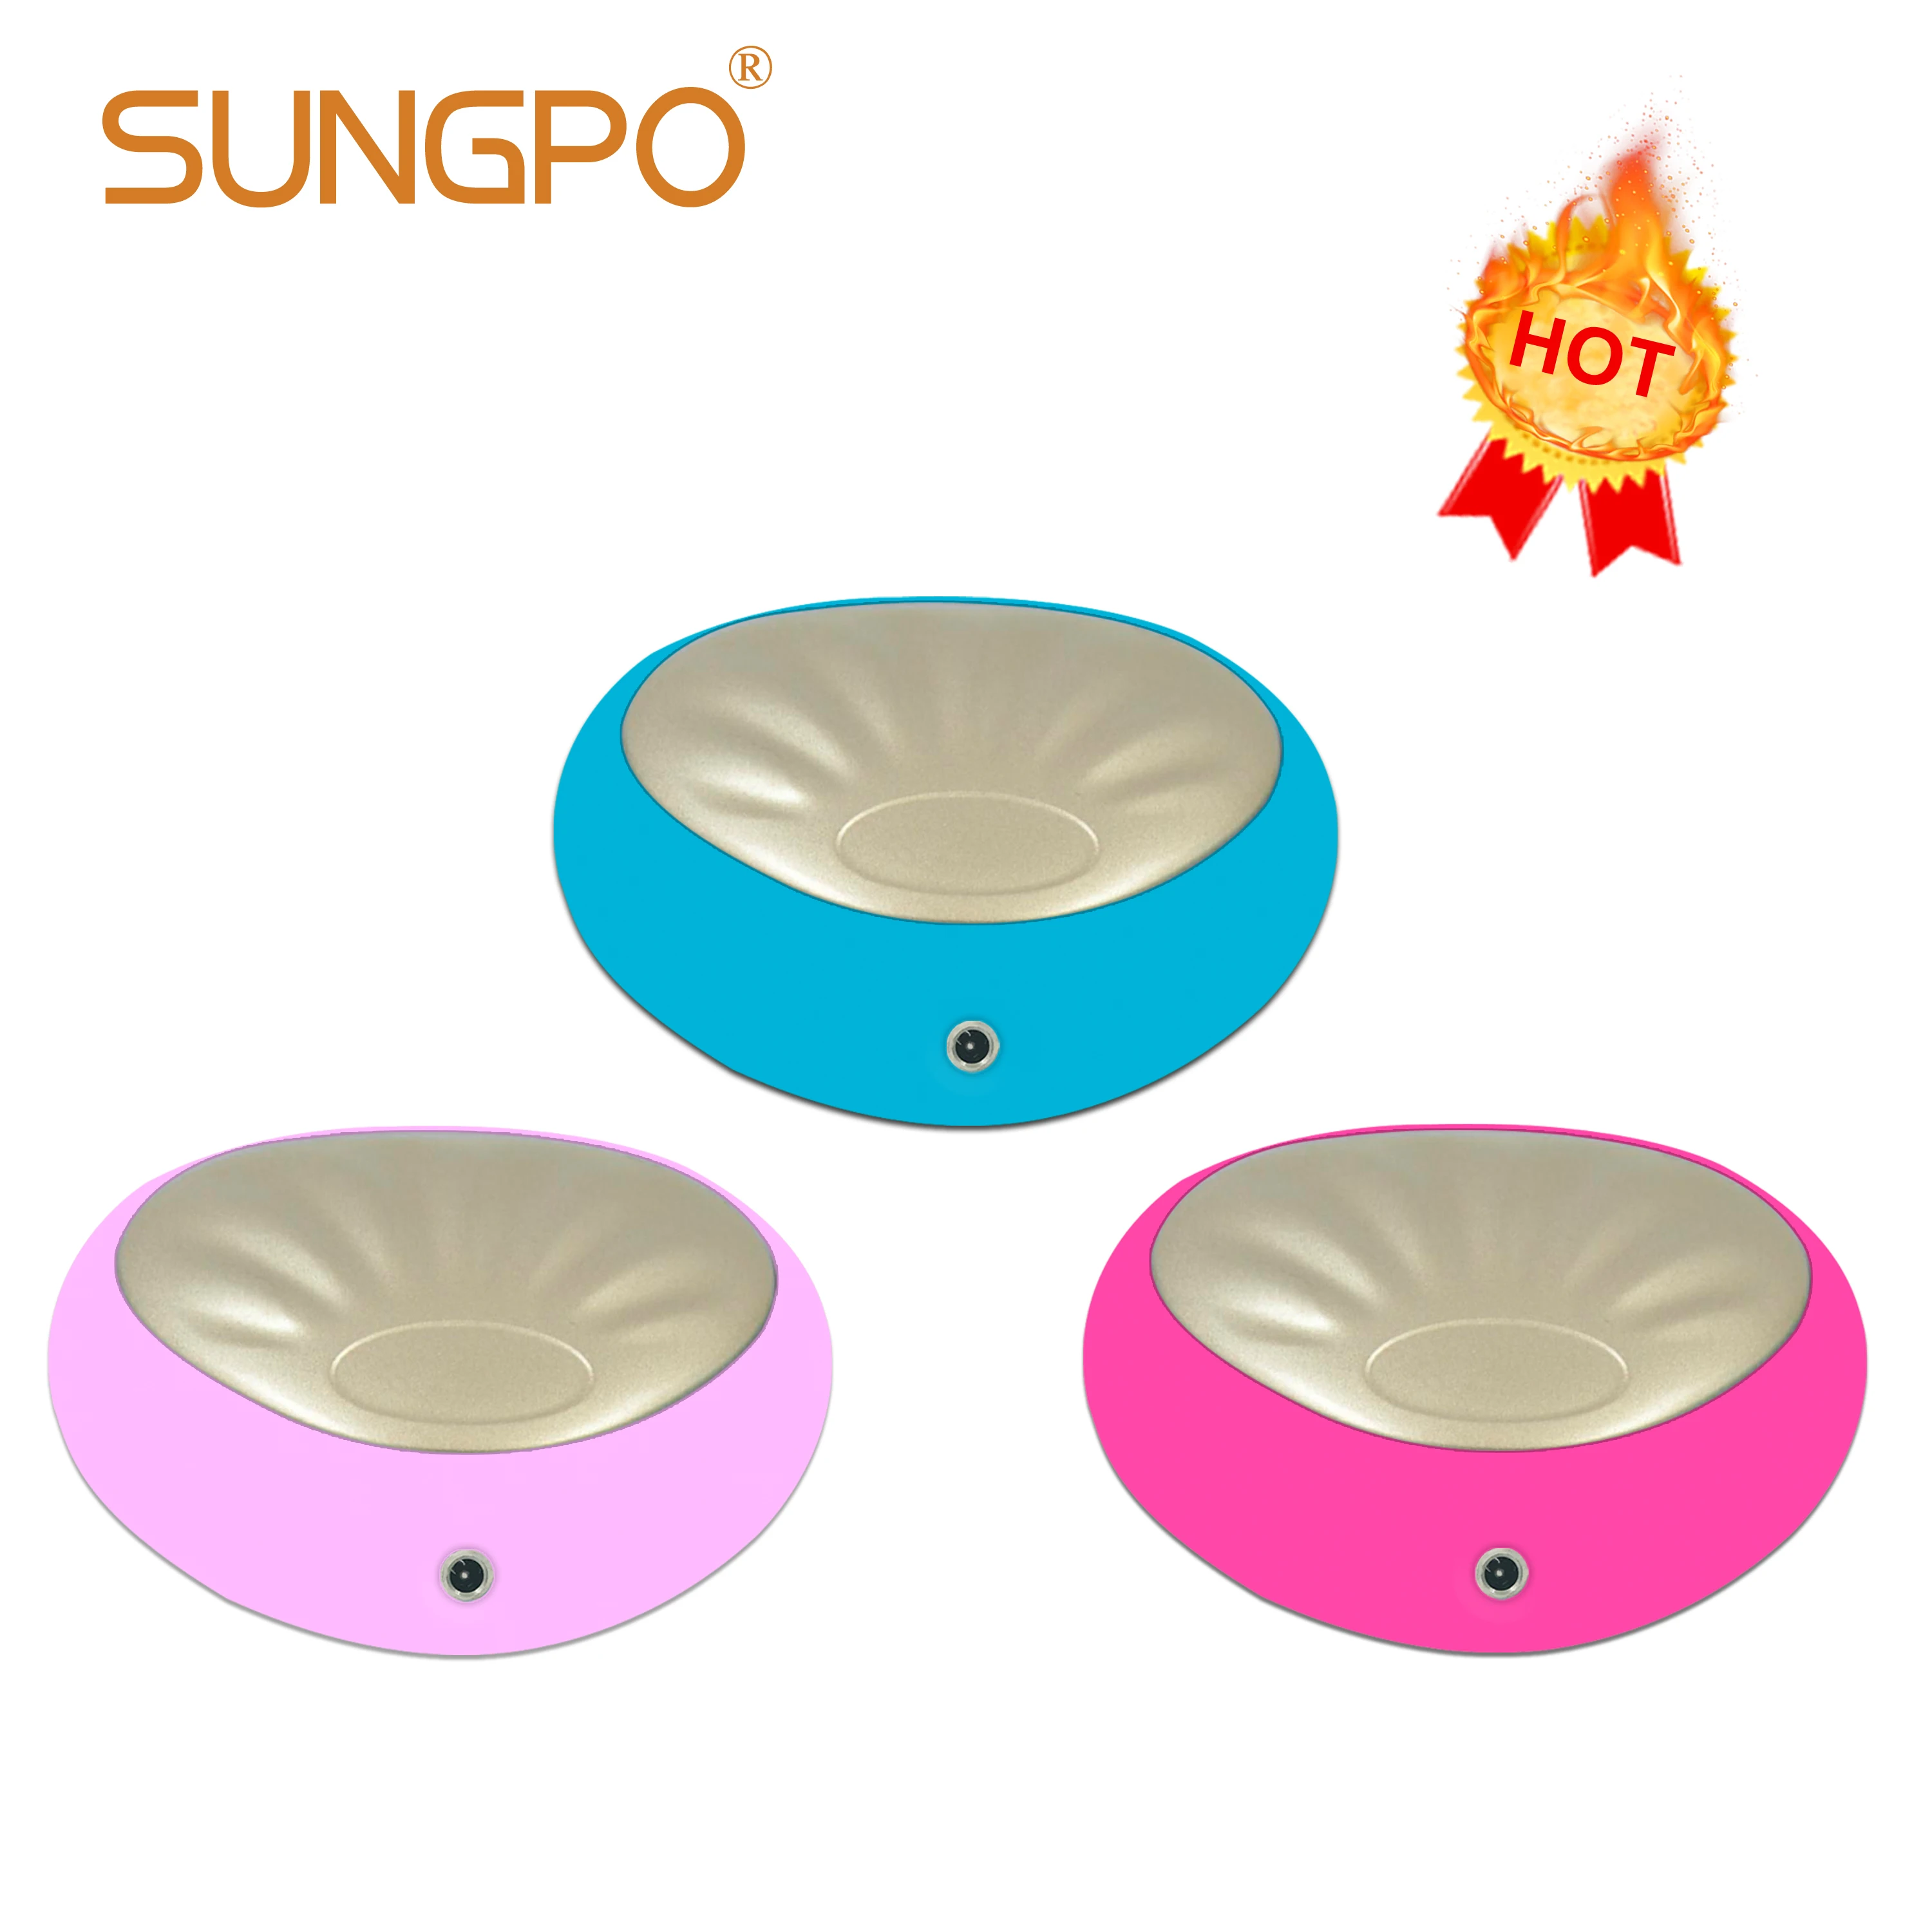 

SUNGPO 90 Seconds Smart Facial Mask Warm and Cool Skin Care 3 Colors LED Light Photon, Pink/blue/red